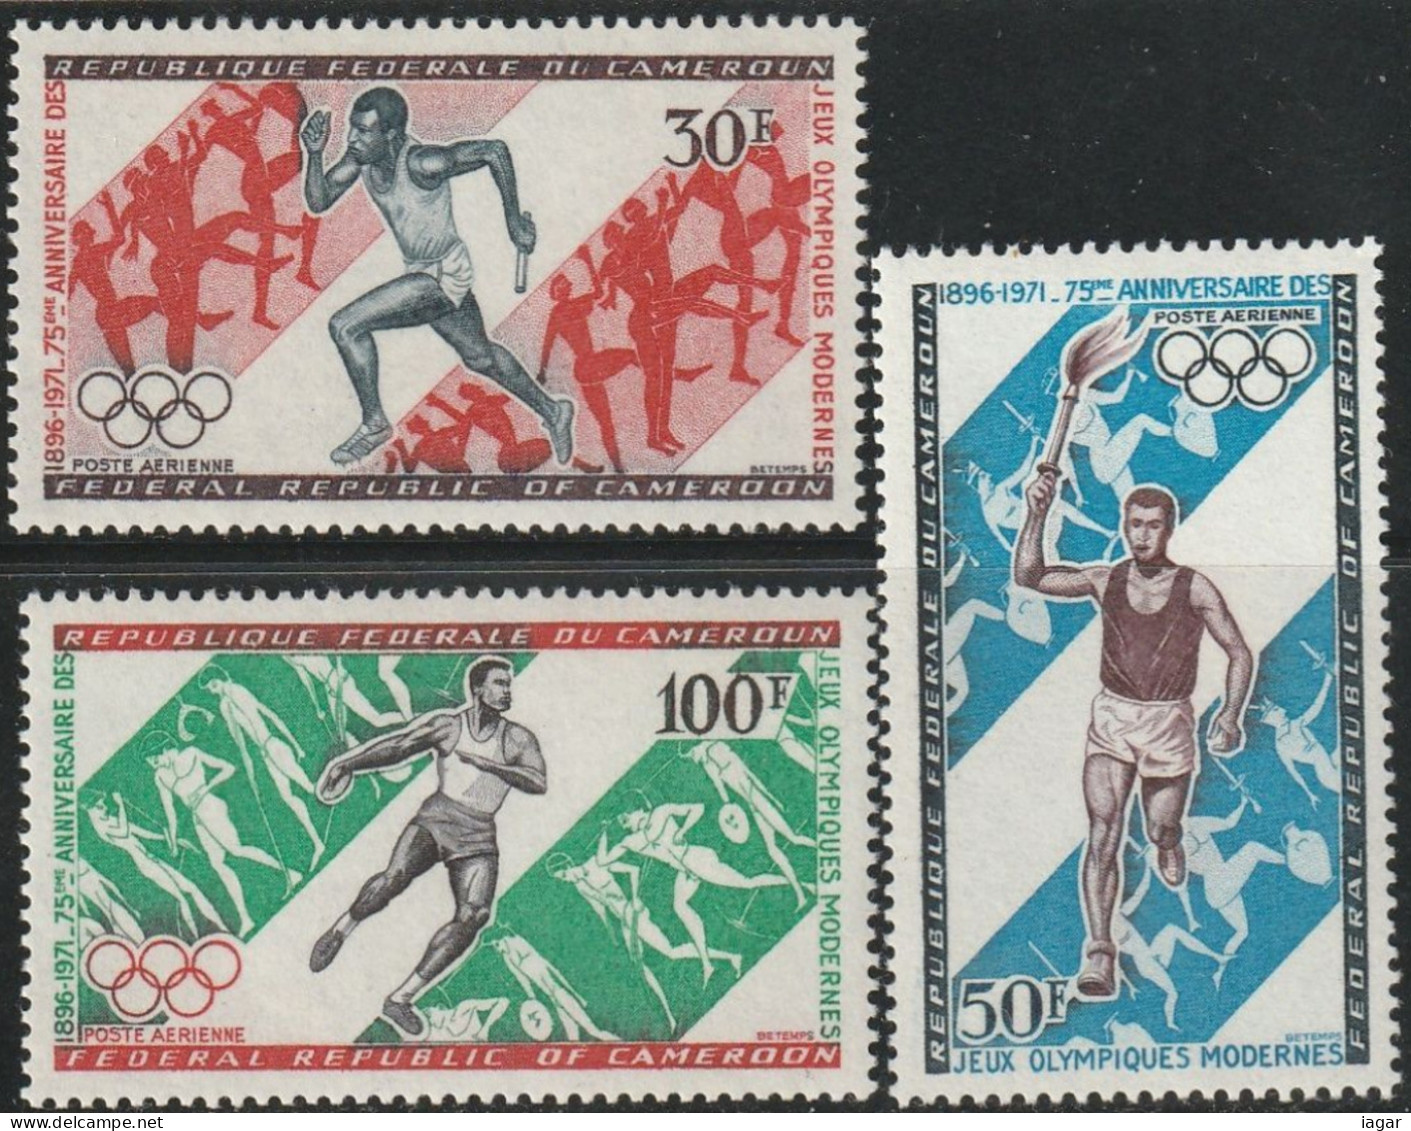 THEMATIC OLYMPIC GAMES:  75th ANNIVERSARY OF THE FIRST MODERN OLYMPIC GAMES.   ATHLETICS DISCIPLINES  - CAMEROUN - Sommer 1896: Athen